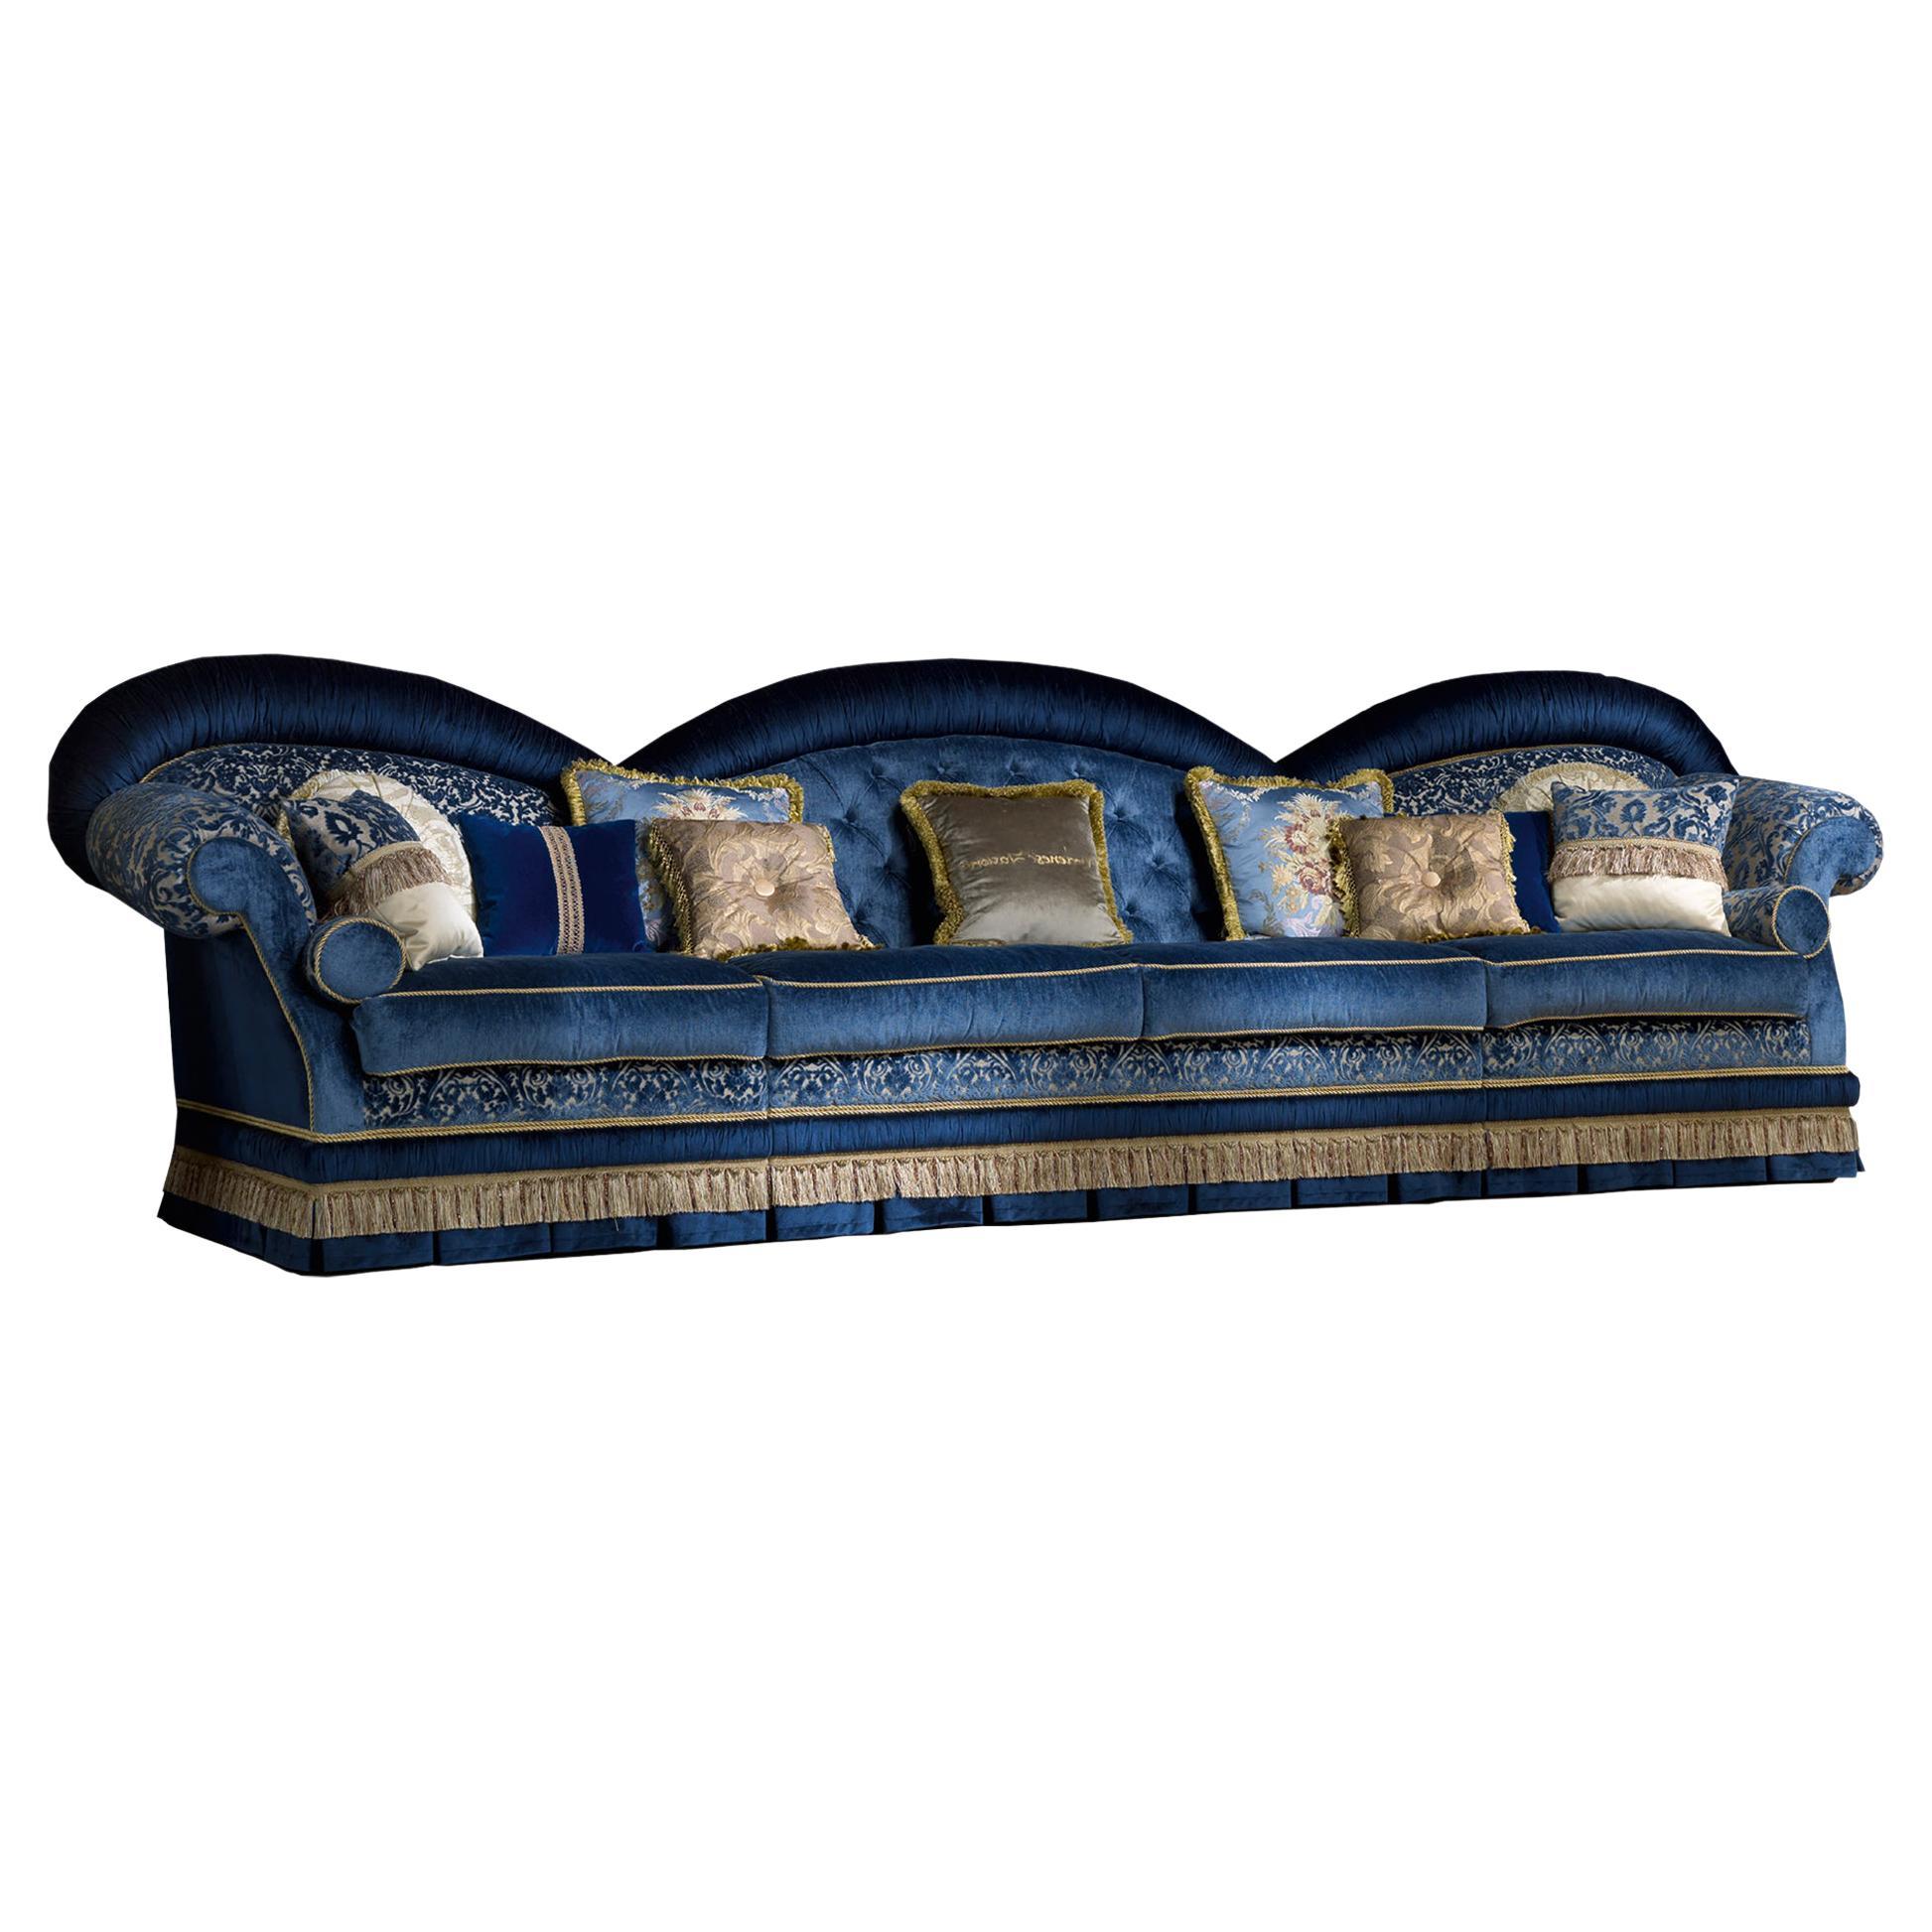 Royal Blue Sofa in Exclusive Massive Wood and Blue Velvet Capitonné Upholstery